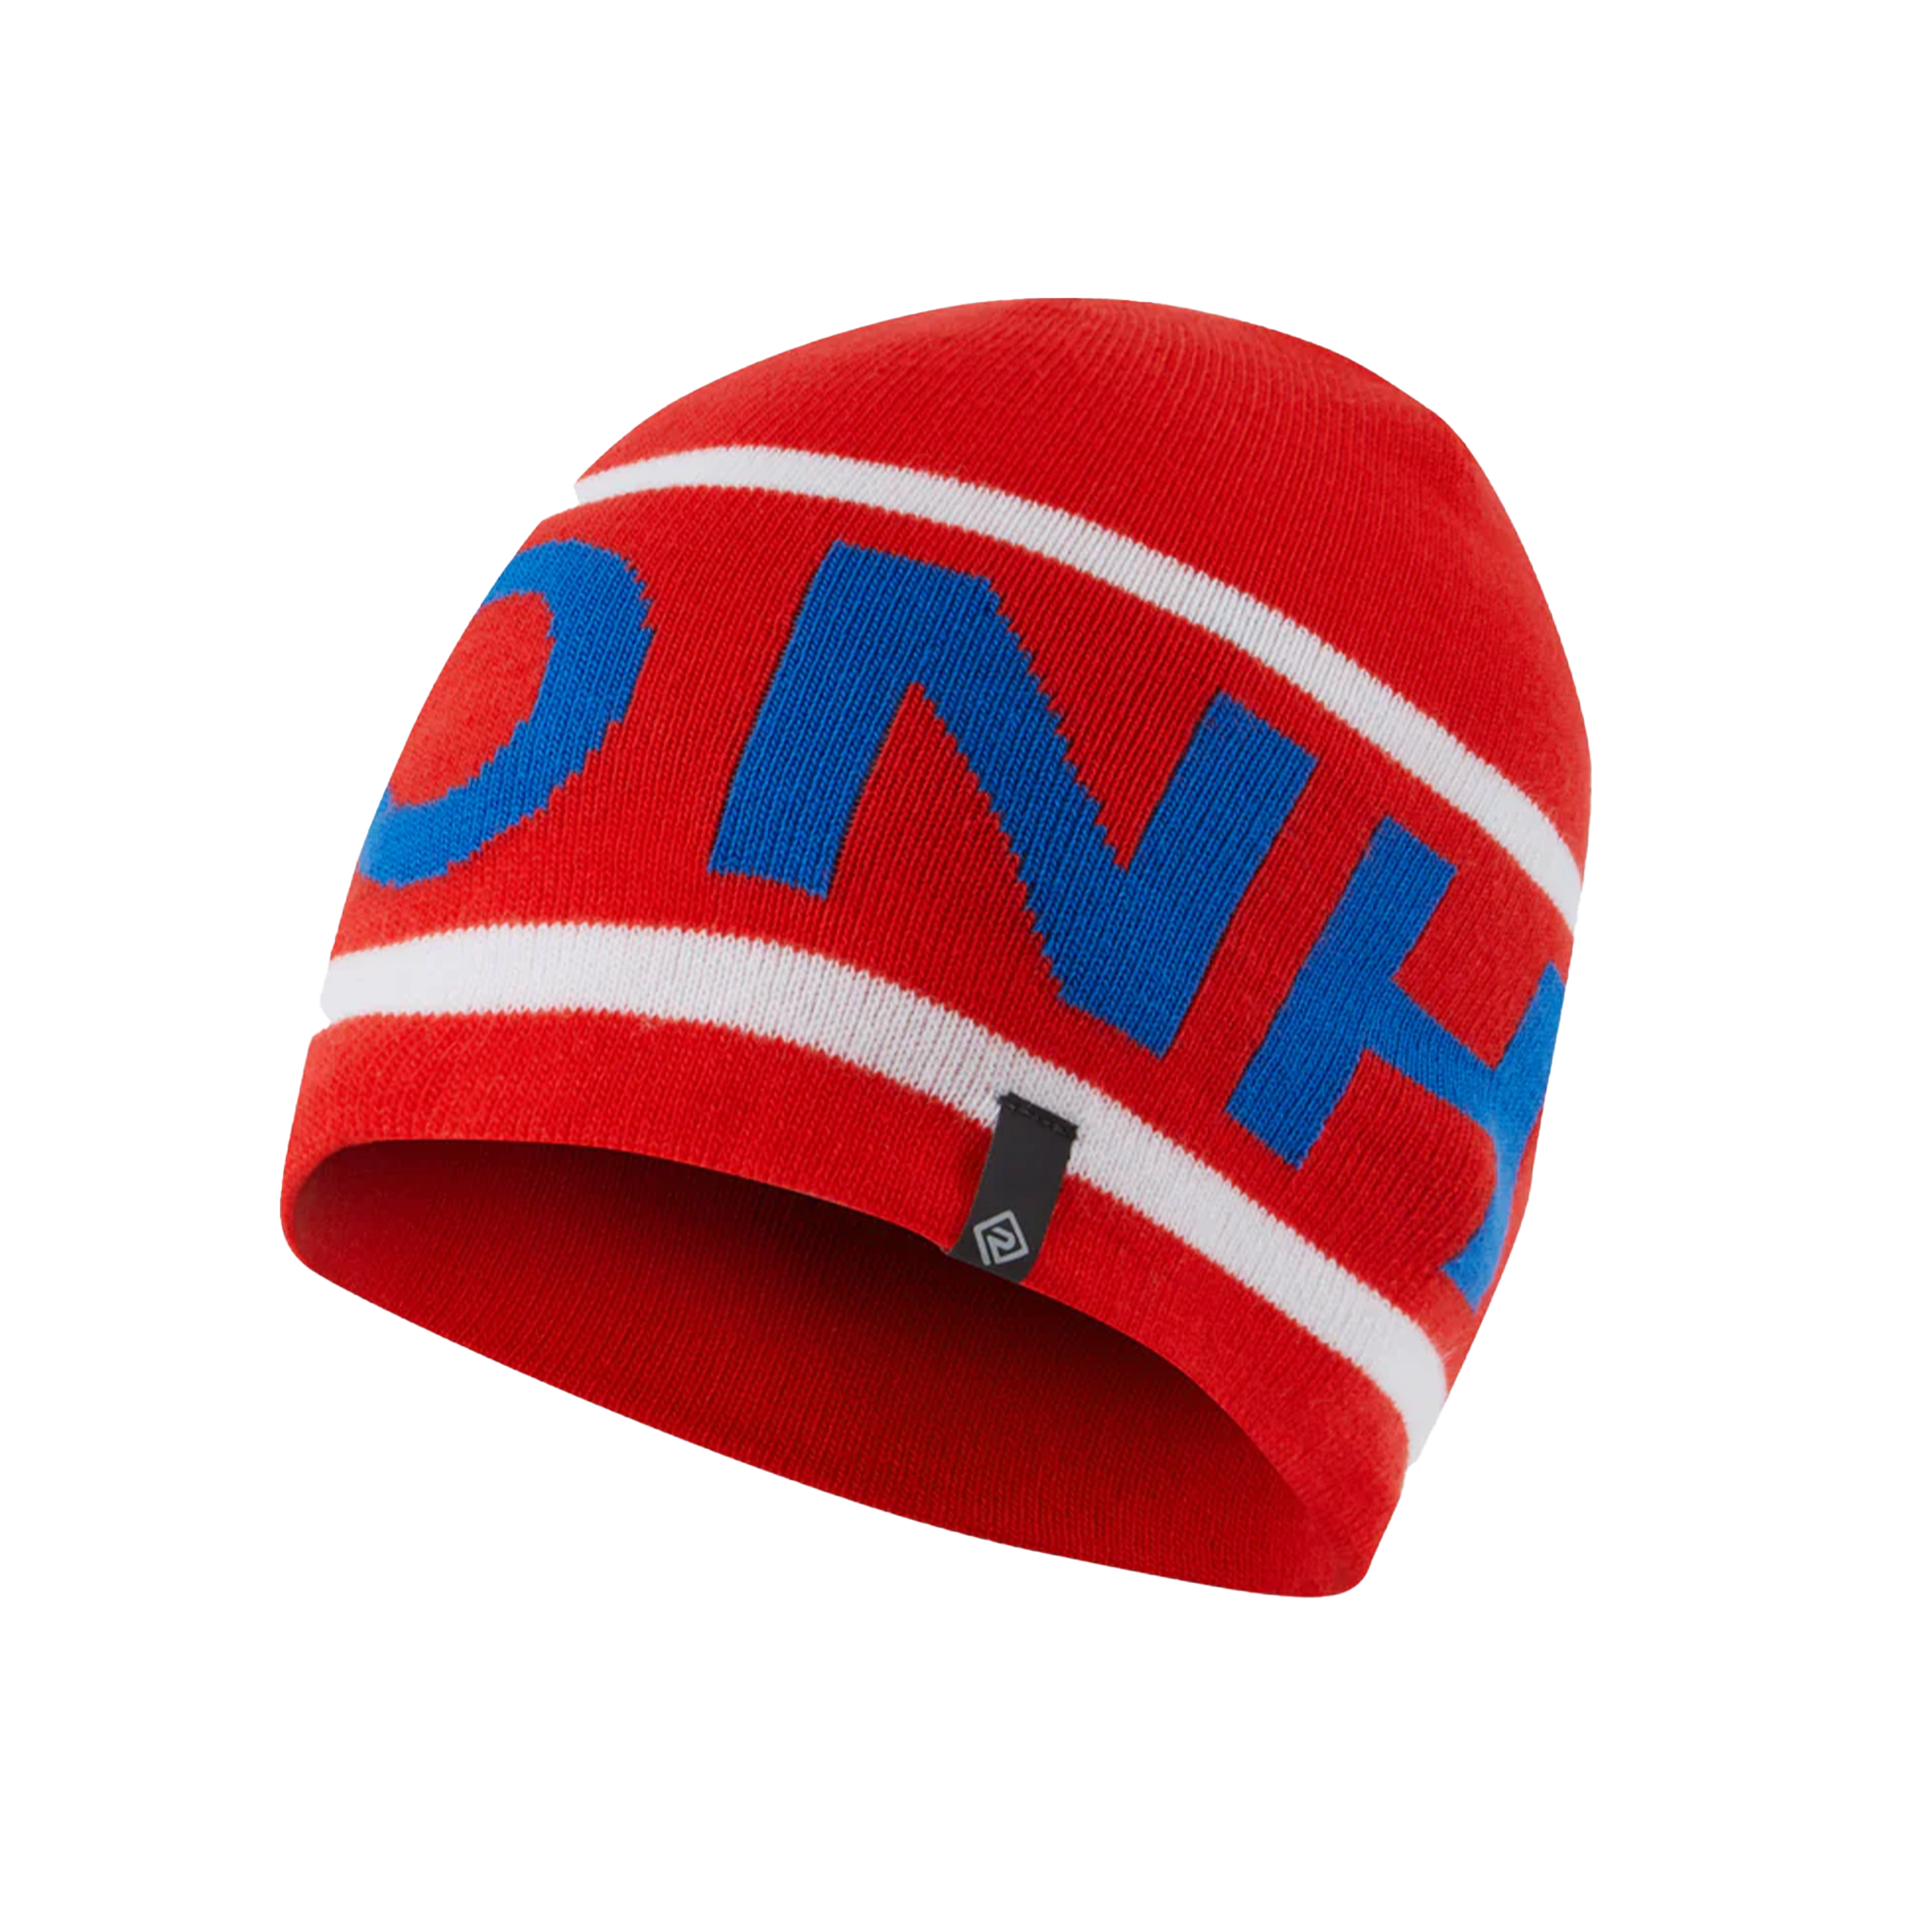 Ronhill Tribe Beanie - Flame/Lapis